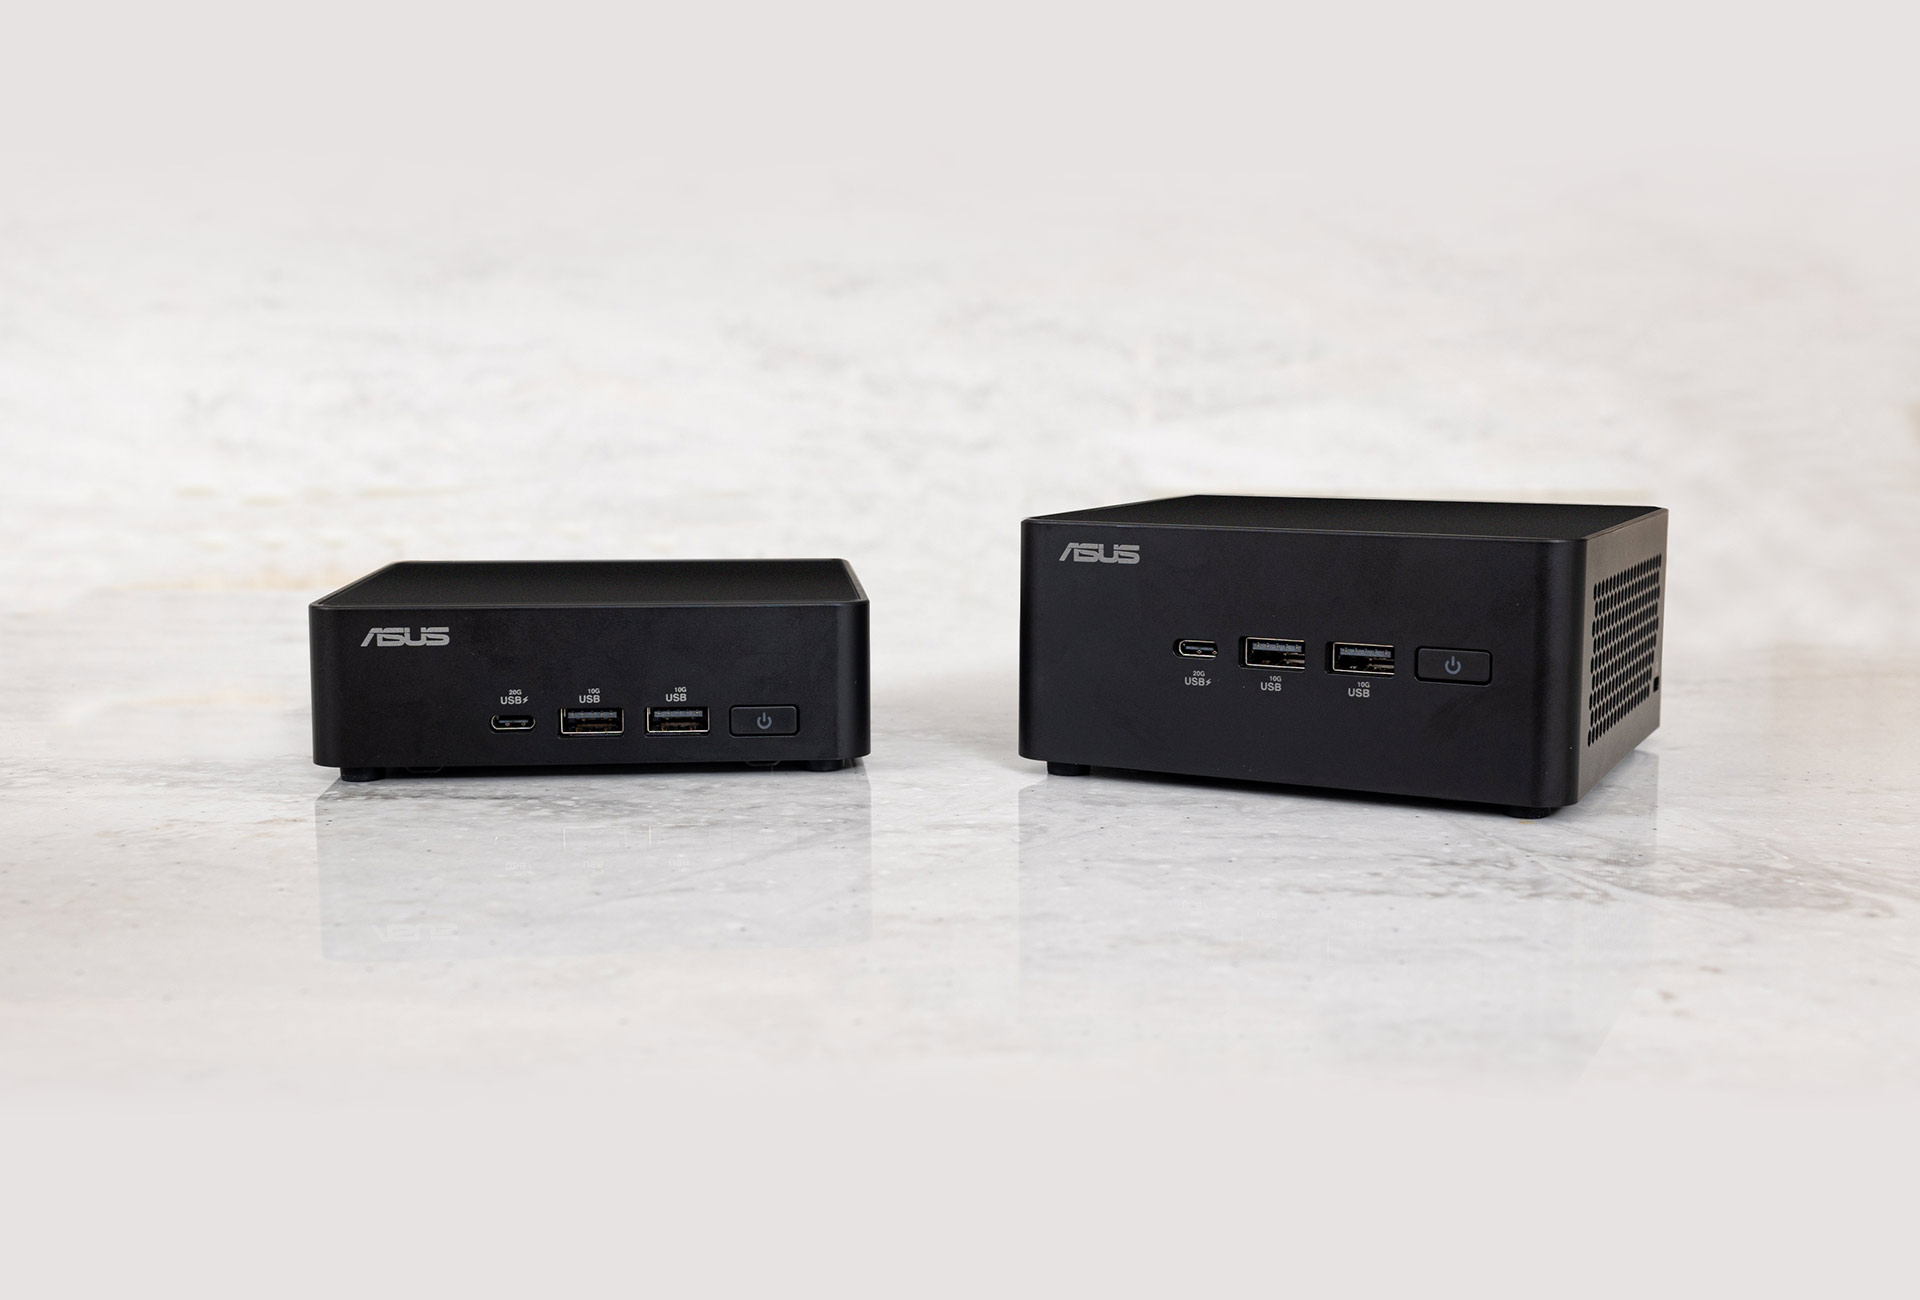 ASUS NUC 14 Pro product photos showing front views of slim and tall versions